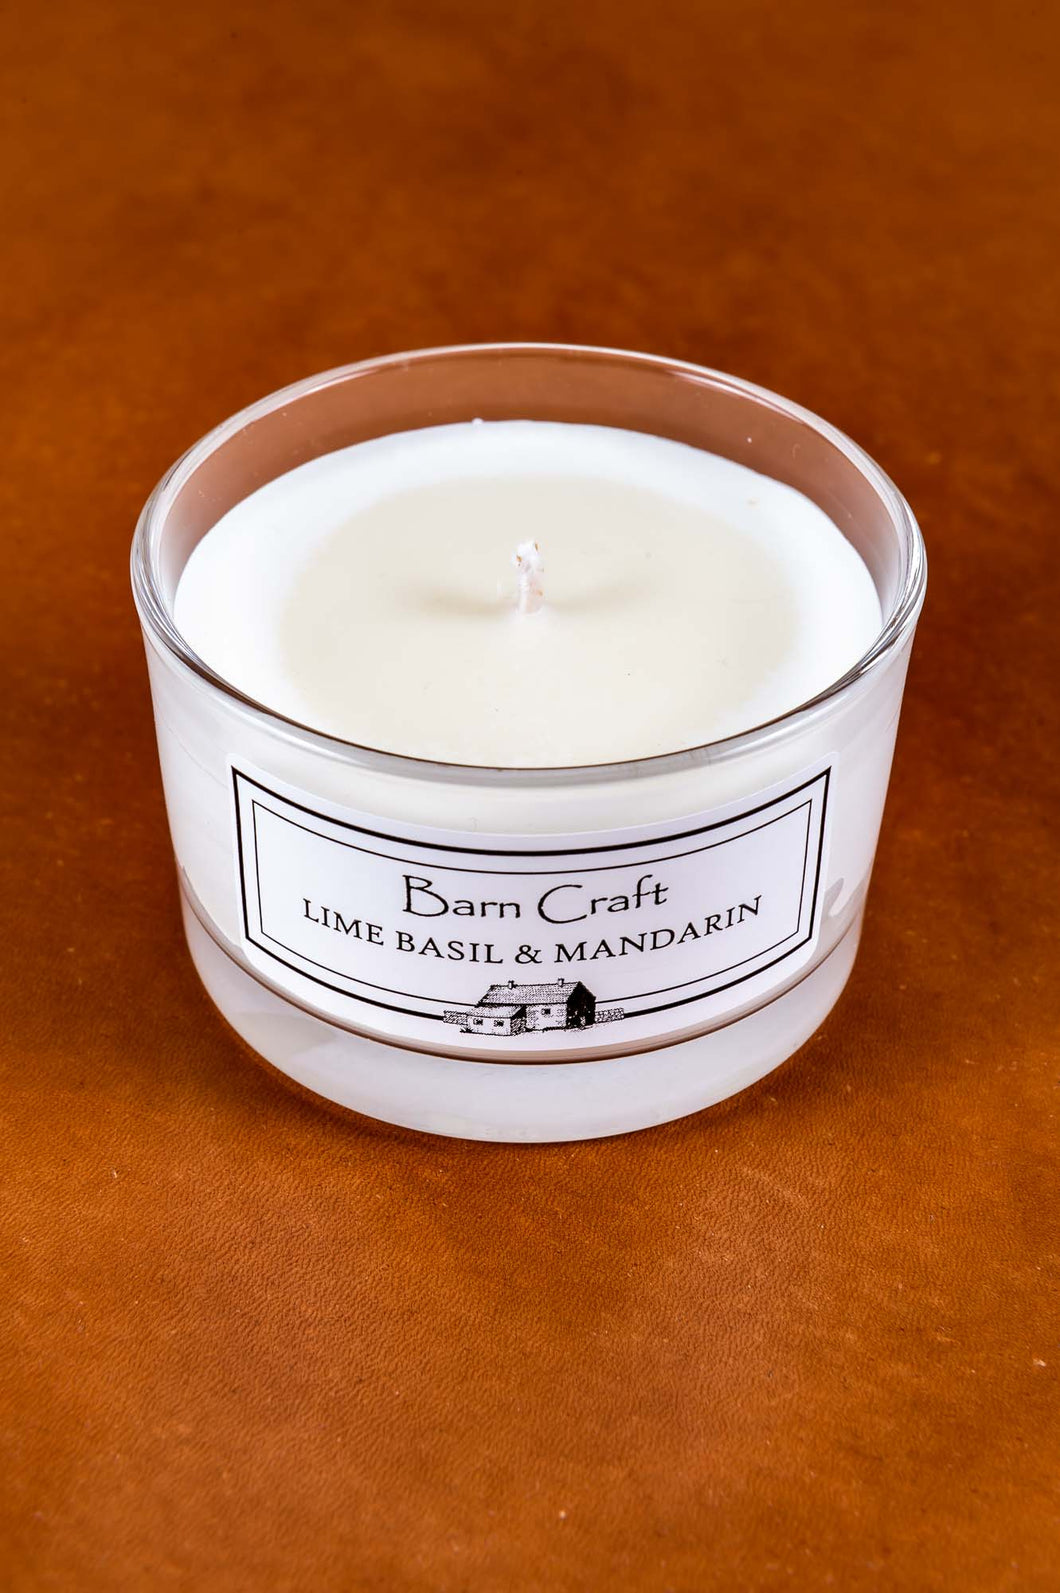 Lime Basil & Mandarin scented soy wax candle